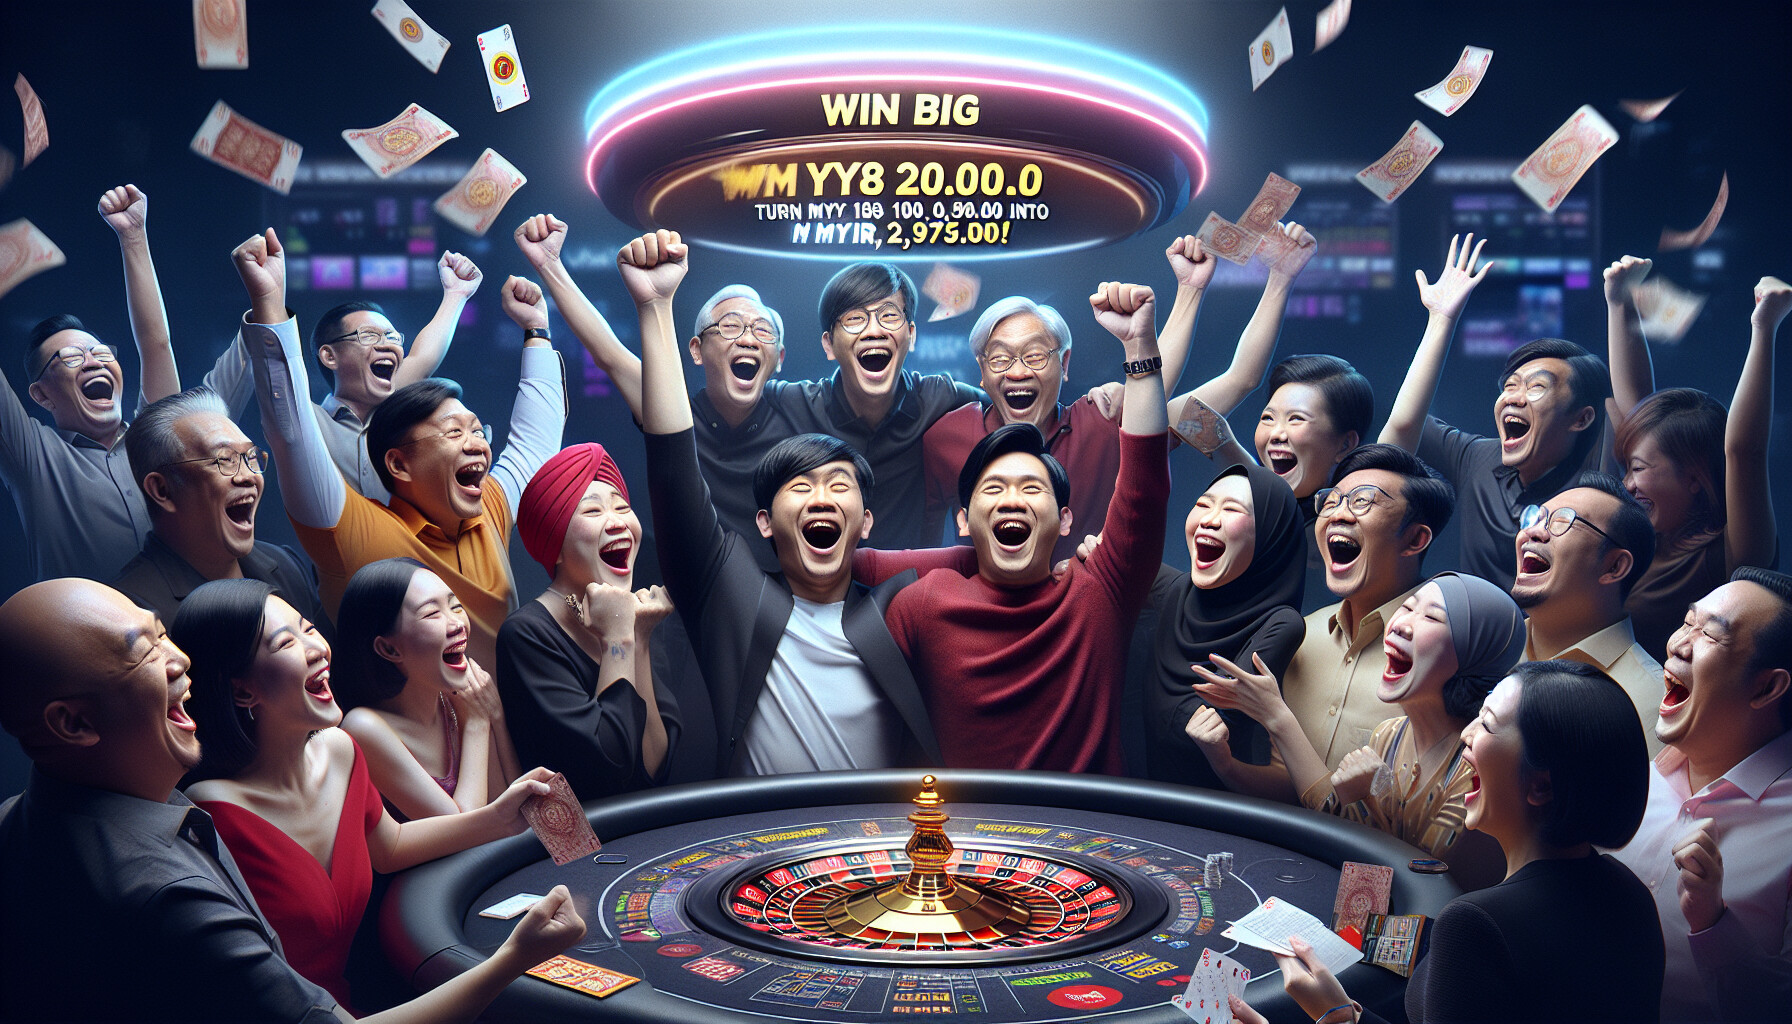 🎰 Feeling lucky? Join 918kiss and transform MYR 100 into MYR 2,975+! Find out how to win big in this thrilling casino adventure now! 🤑💰 #918kiss #CasinoSuccess